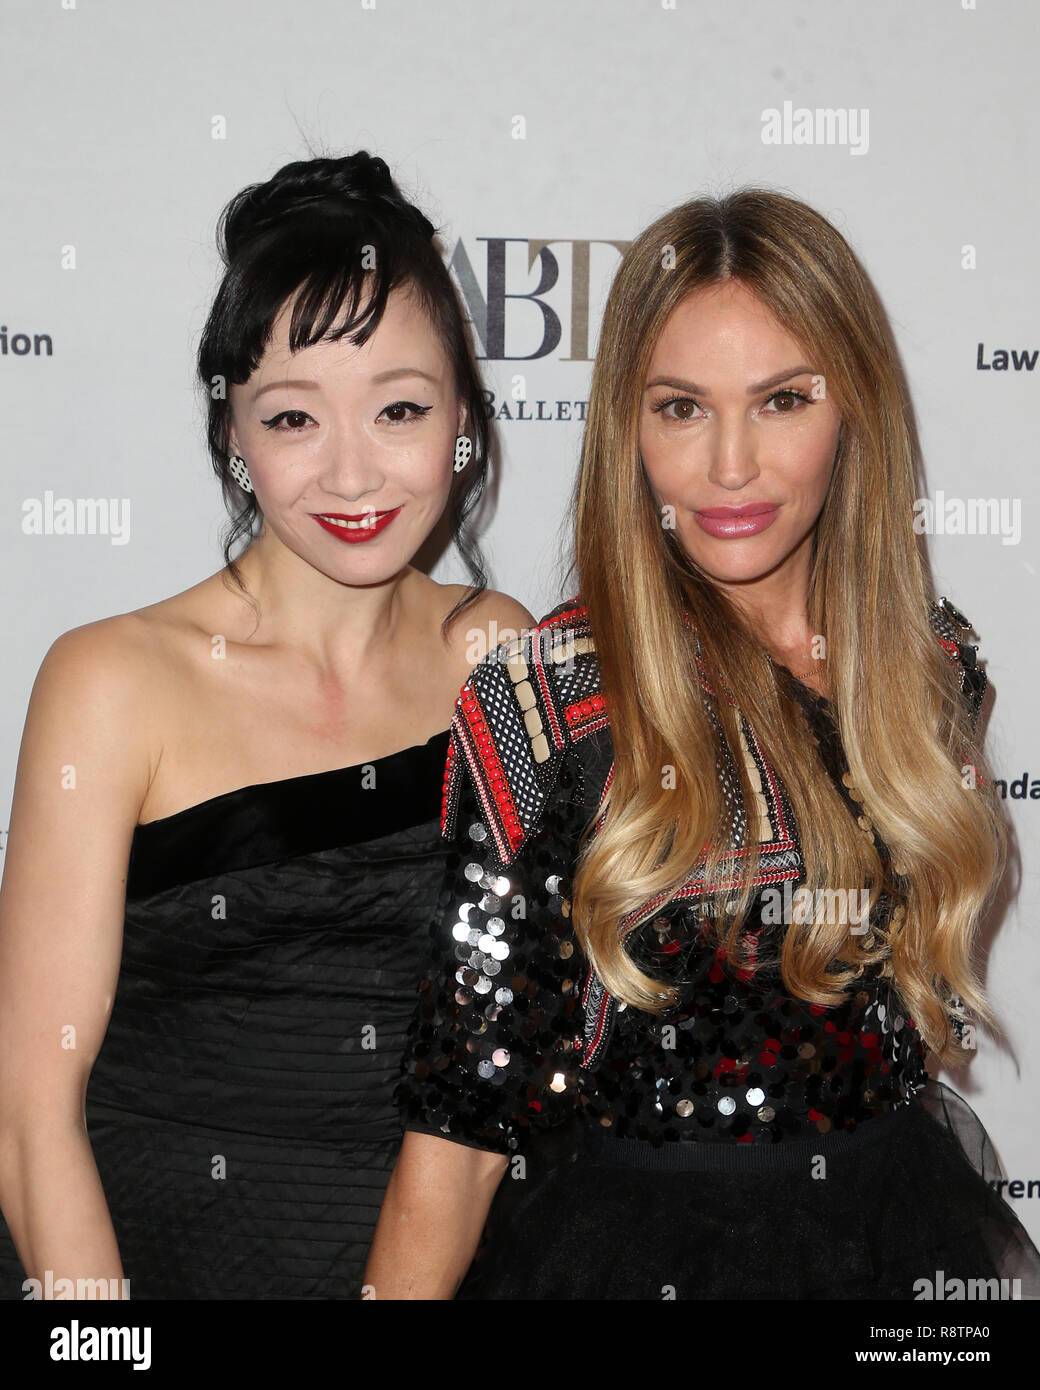 BEVERLY HILLS, CA - DECEMBER 17: ZJ Fang and Jolene Blalock Rapino at the American Ballet Theatre’s Annual Holiday Benefit at The Beverly Hilton Hotel in Beverly Hills, California on December 17, 2018. Credit: Faye Sadou/MediaPunch Stock Photo